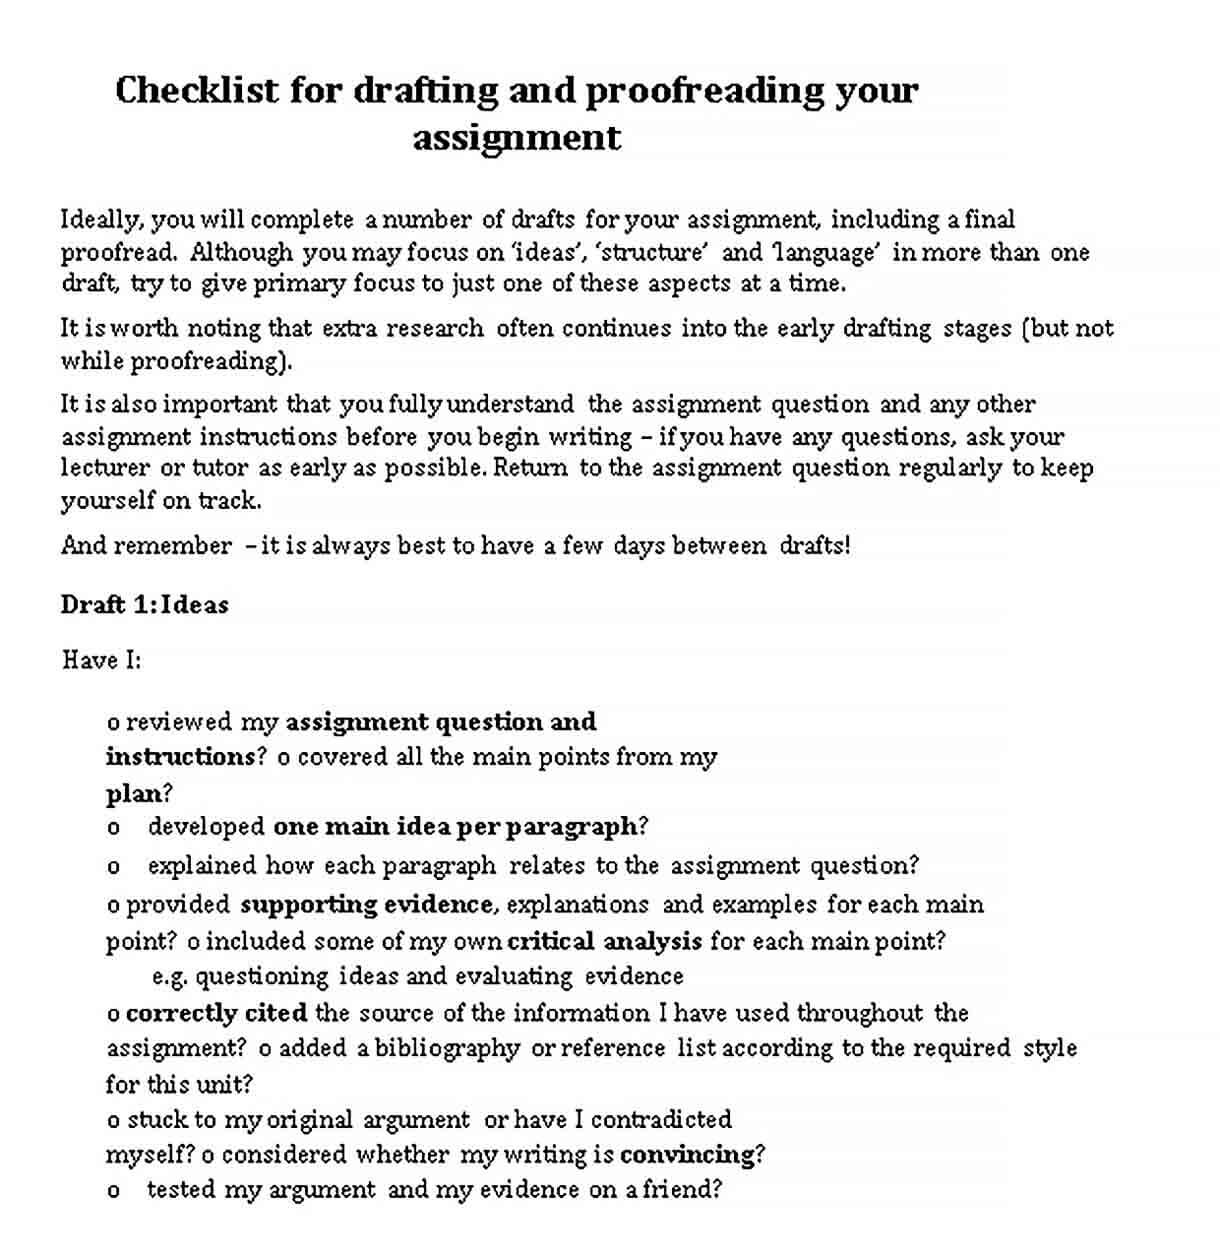 Sample Drafting Checklist Example in PDF